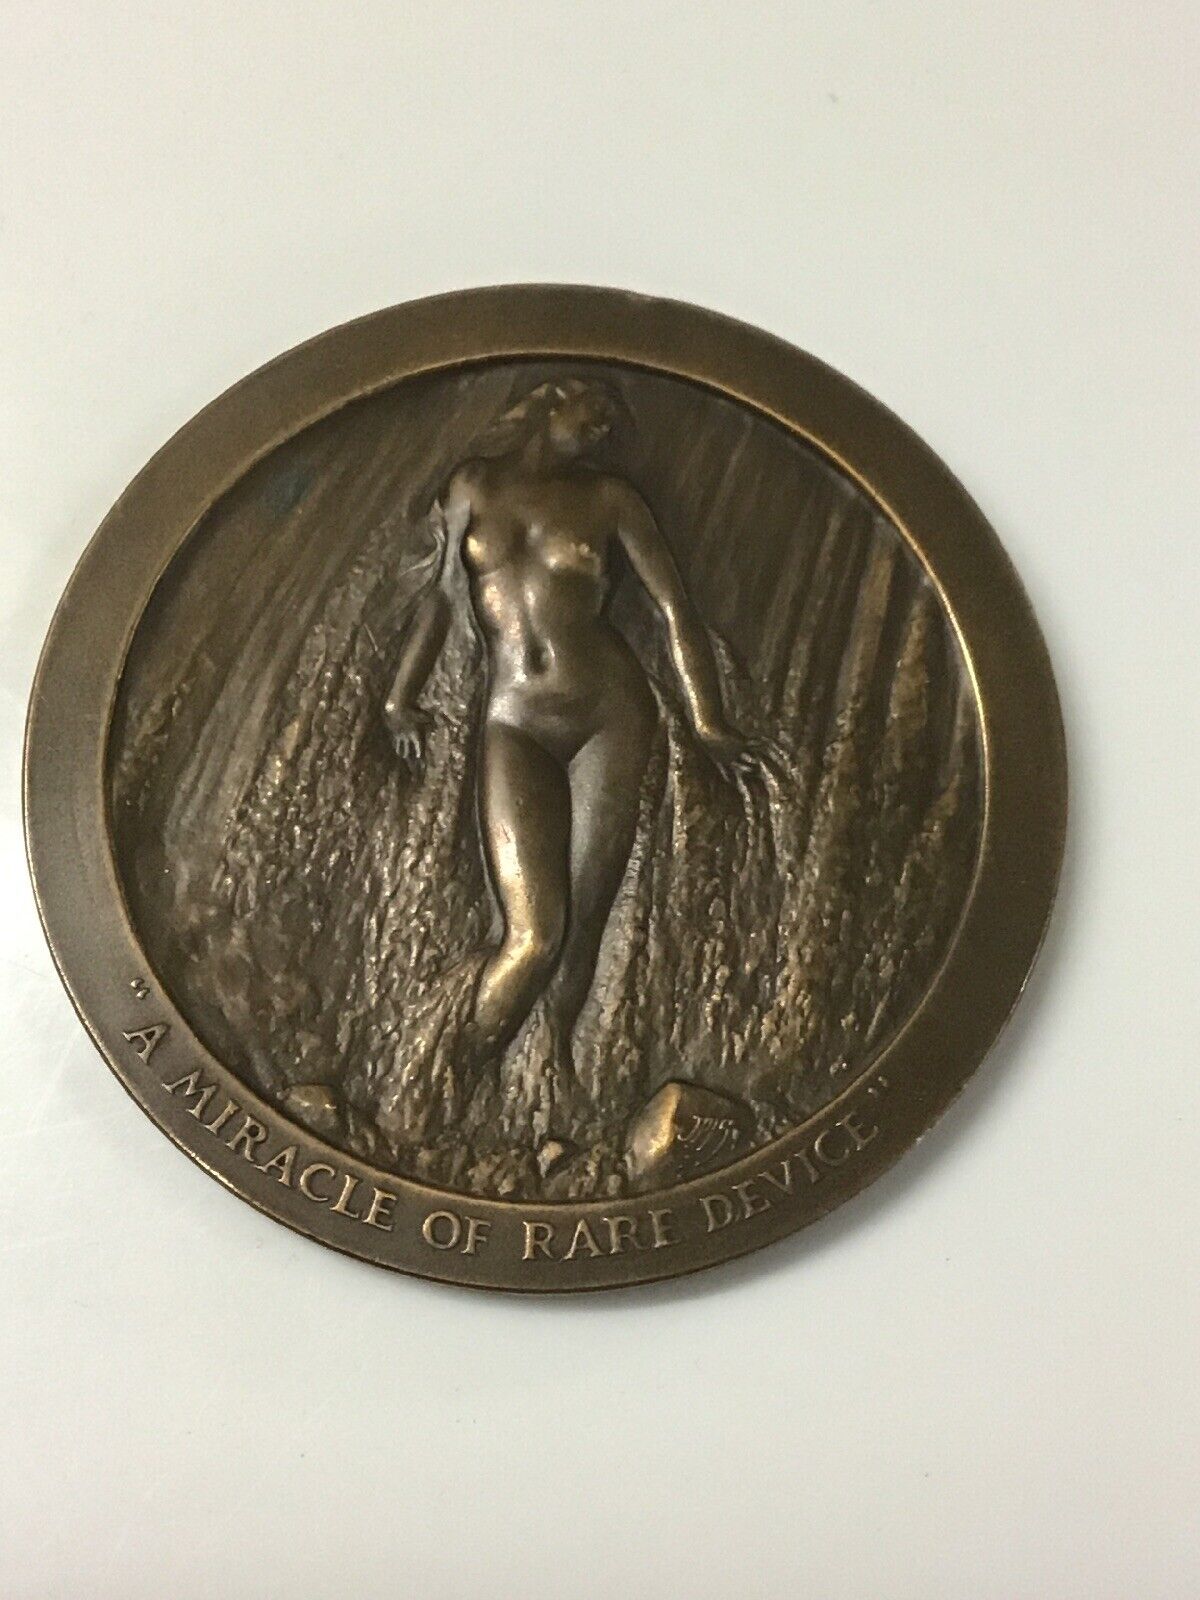 A Miracle Of Rare Device Bronze Medal Paterson Parchment Paper Company Sensuous